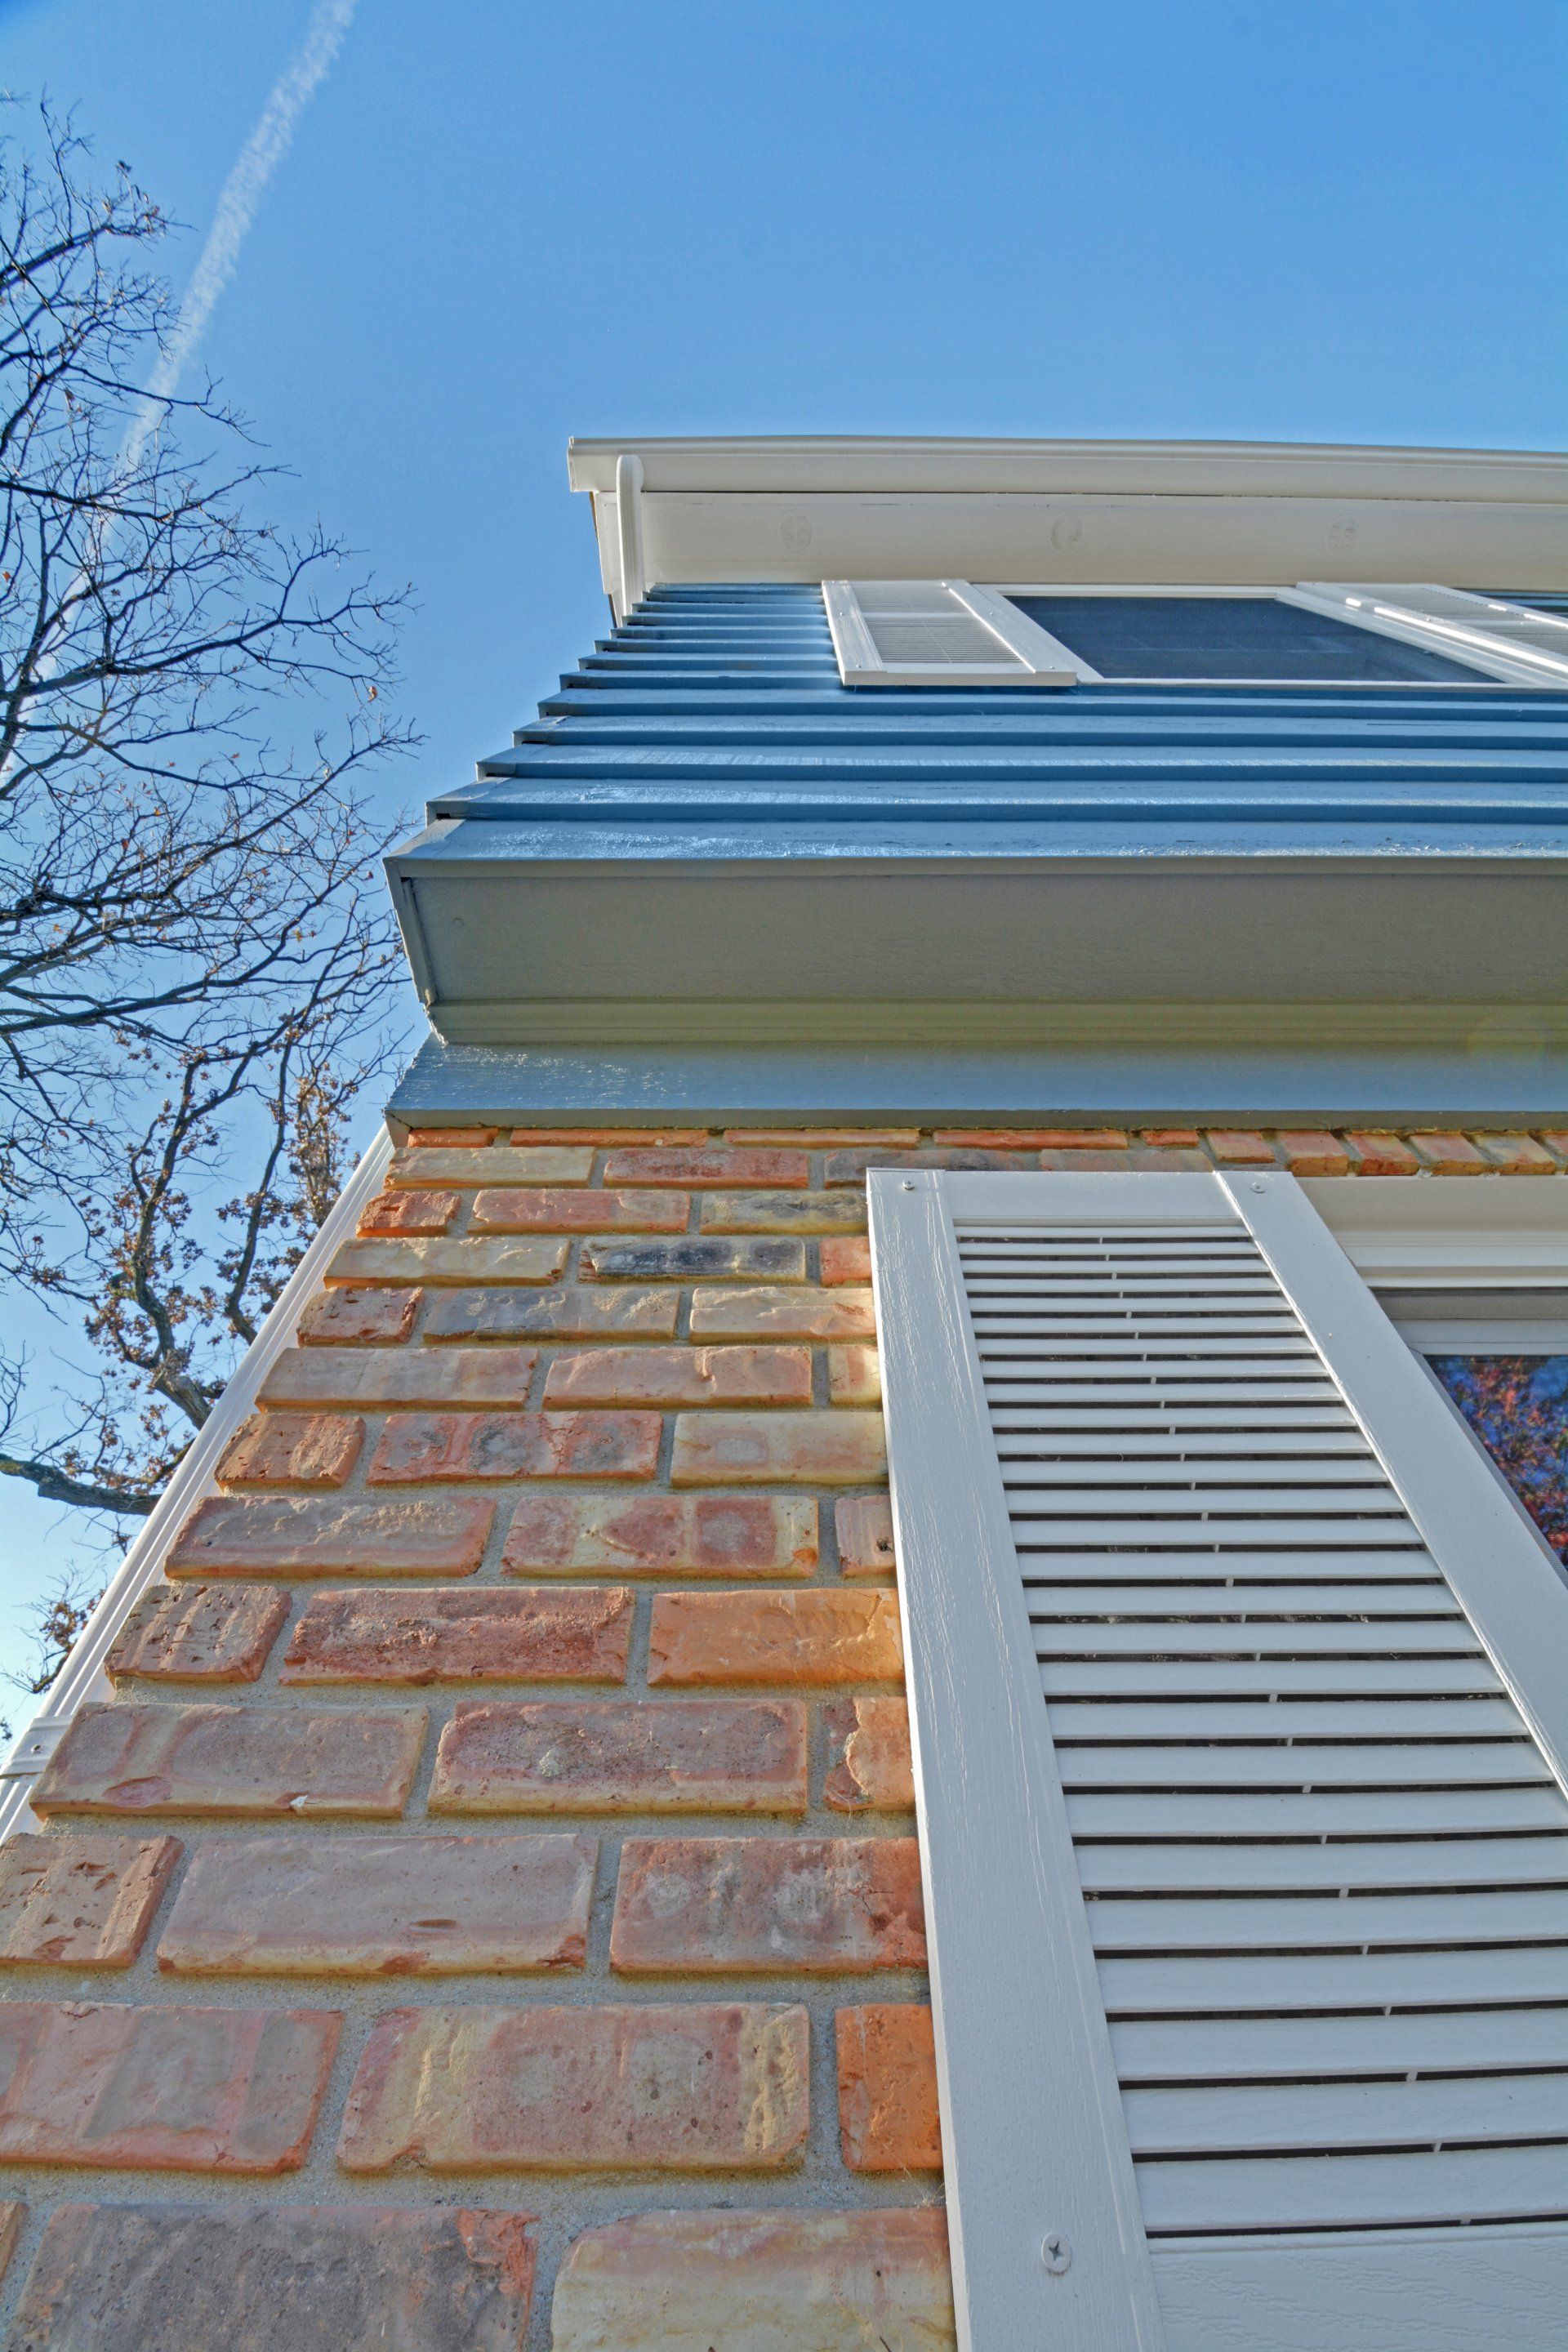 looking up at a brick building with white shutters